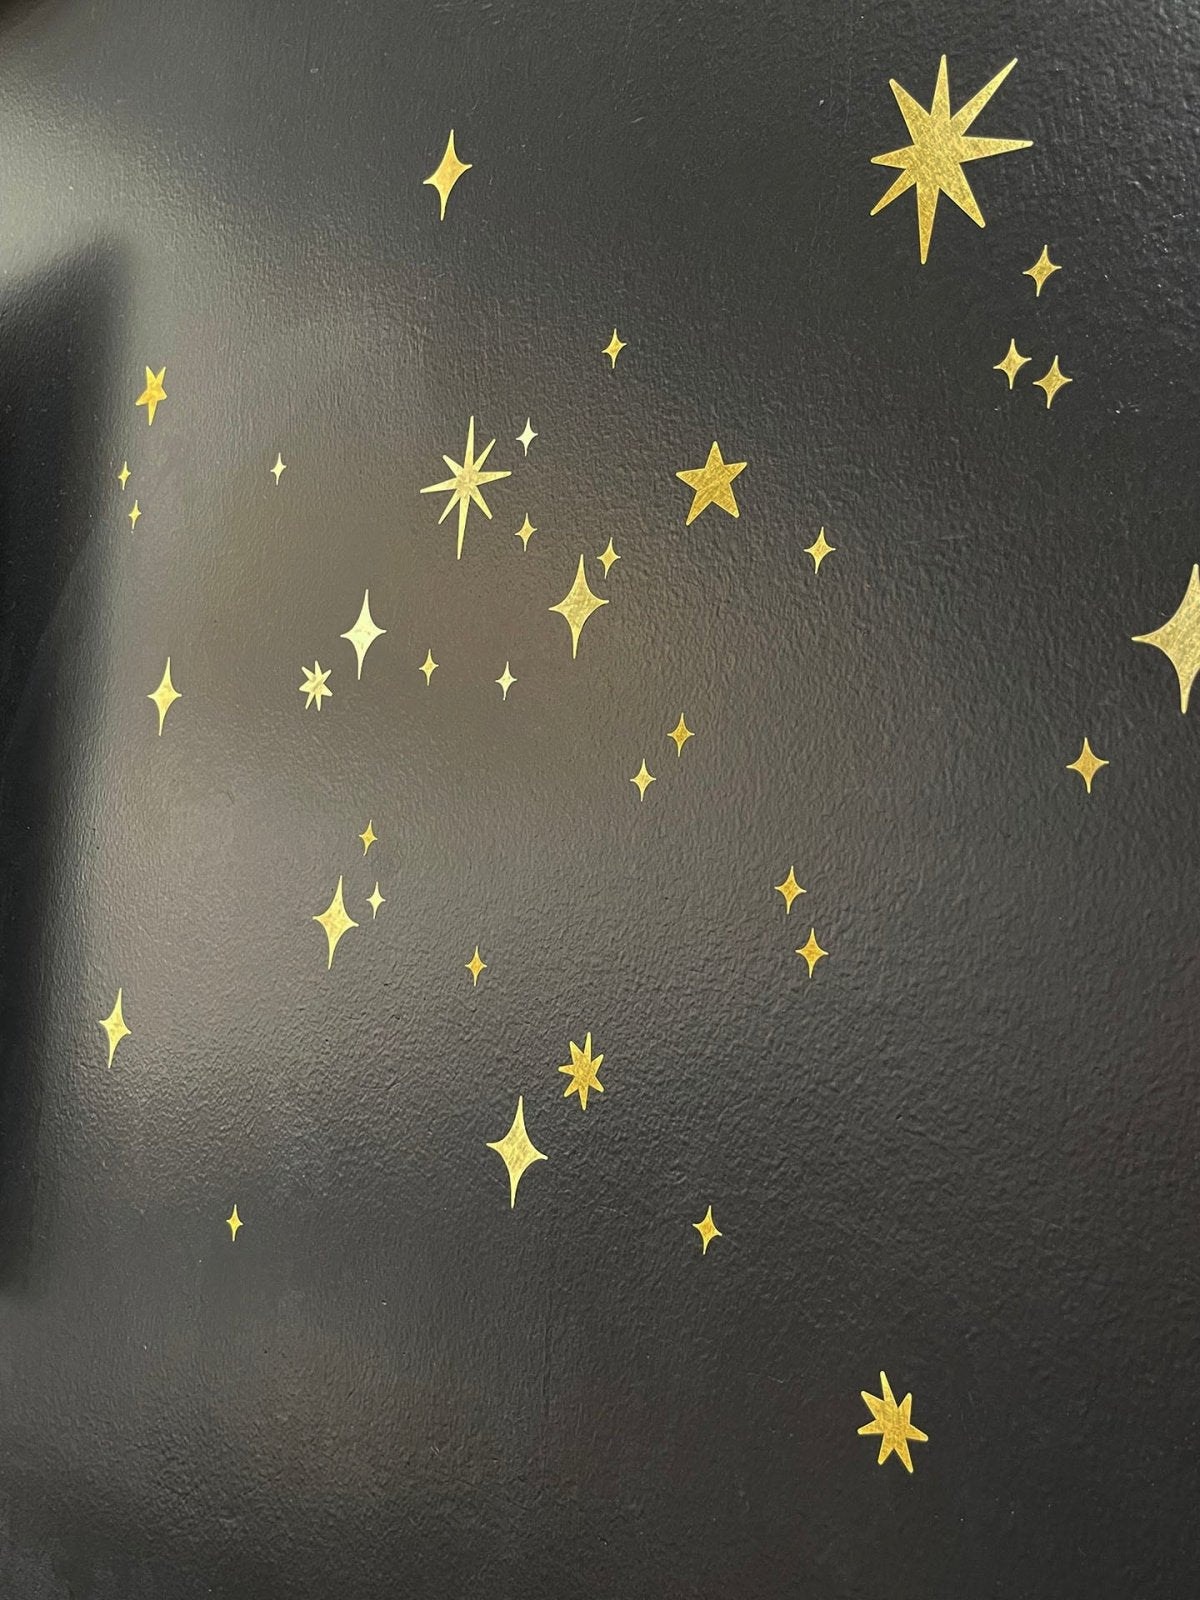 Gold Twinkly Stars stickers of various sizes and designs scattered on a dark textured surface, perfect for creating a magical scene decor. Brand Name: Cover-Alls